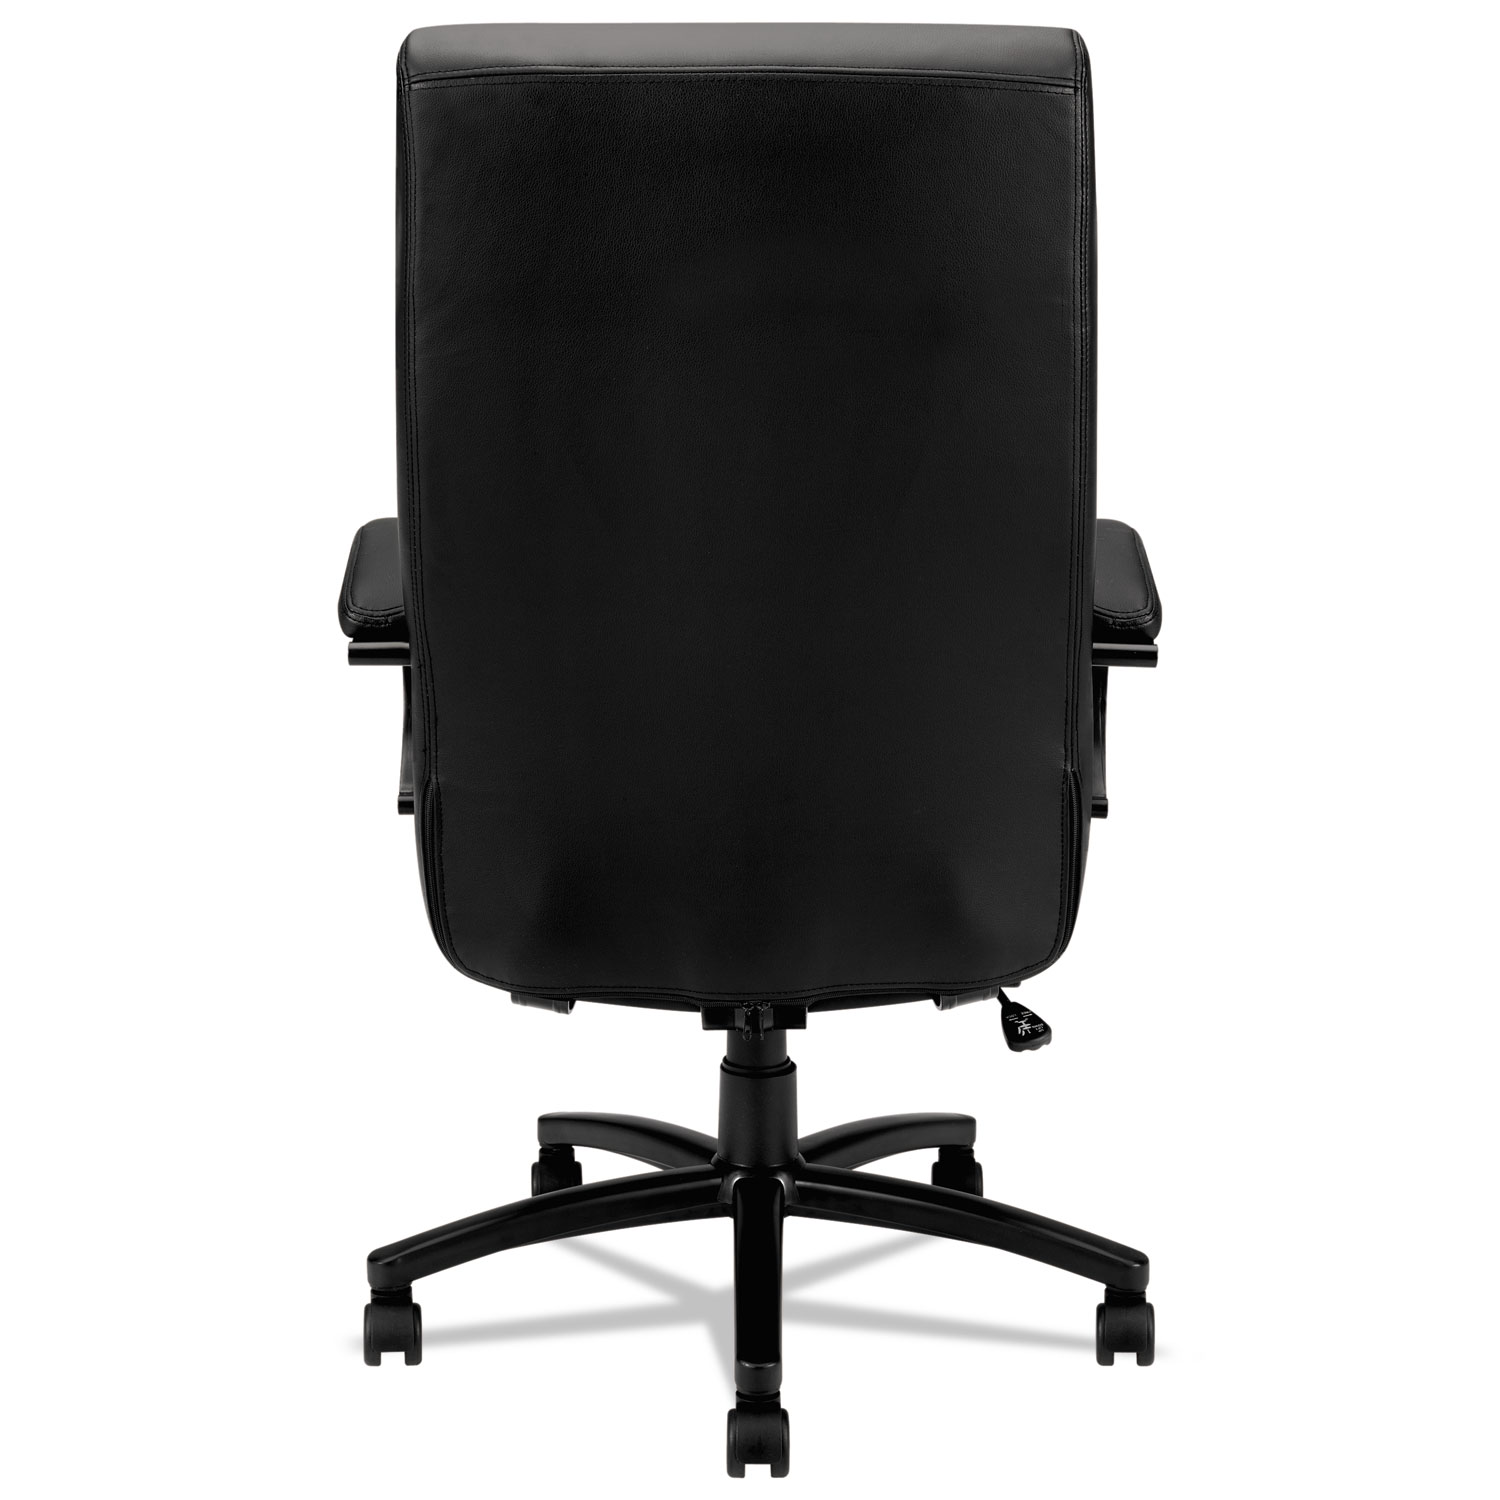 VL685 Series Big & Tall Leather Chair, Supports up to 450 lbs., Black